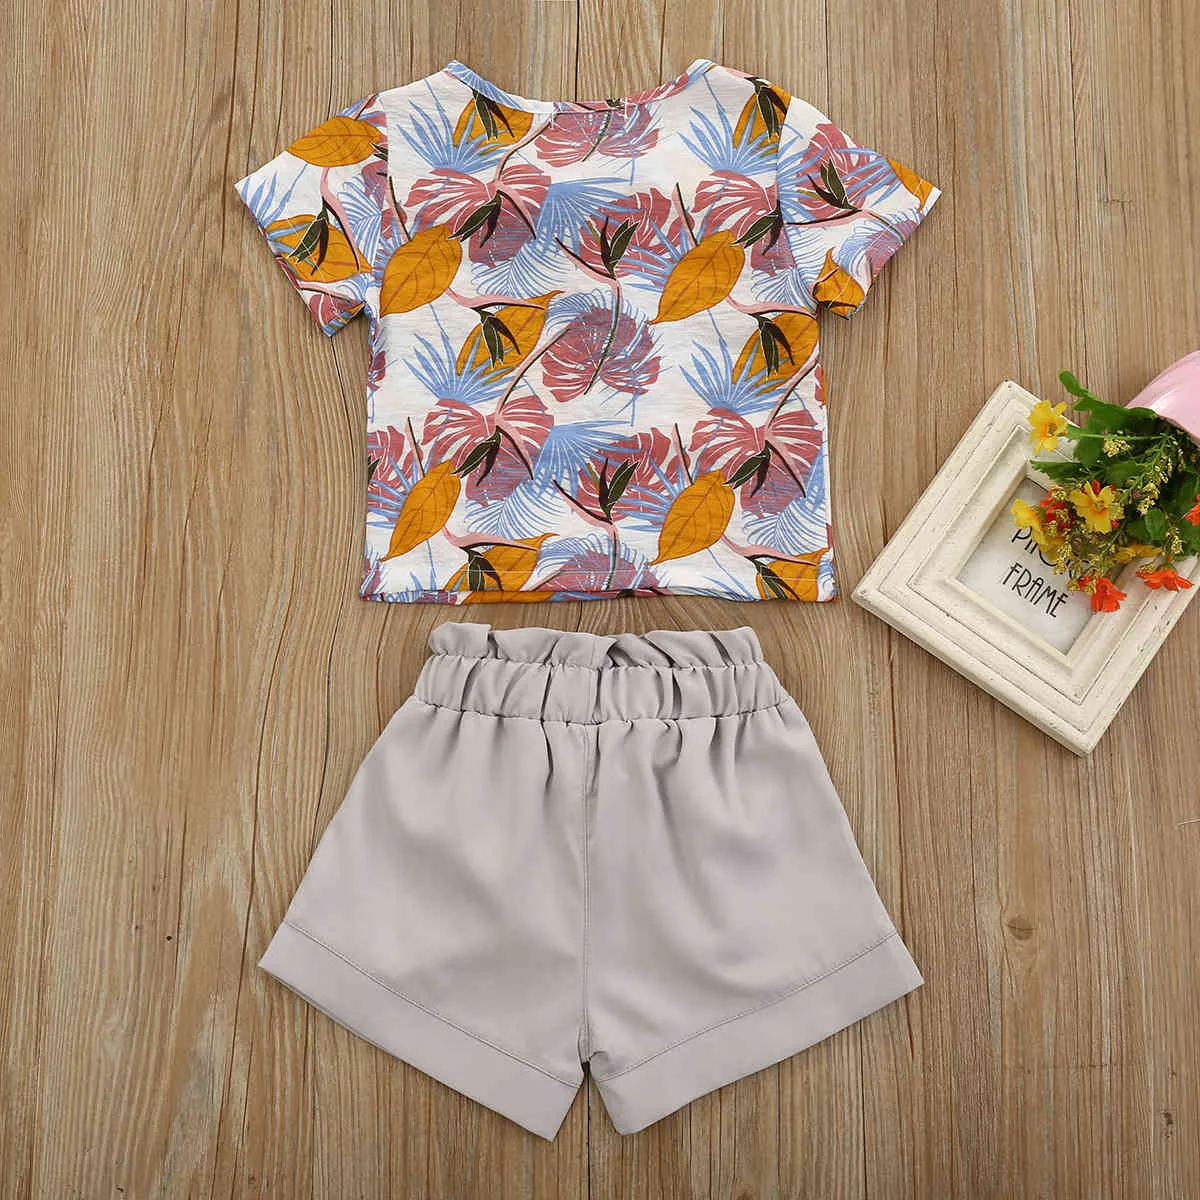 Children's Clothes Set Summer Short-sleeved Leaf Print Shirt + Solid Color Shorts 2-piece Casual Suit For Toddler Boys and Girls 210515